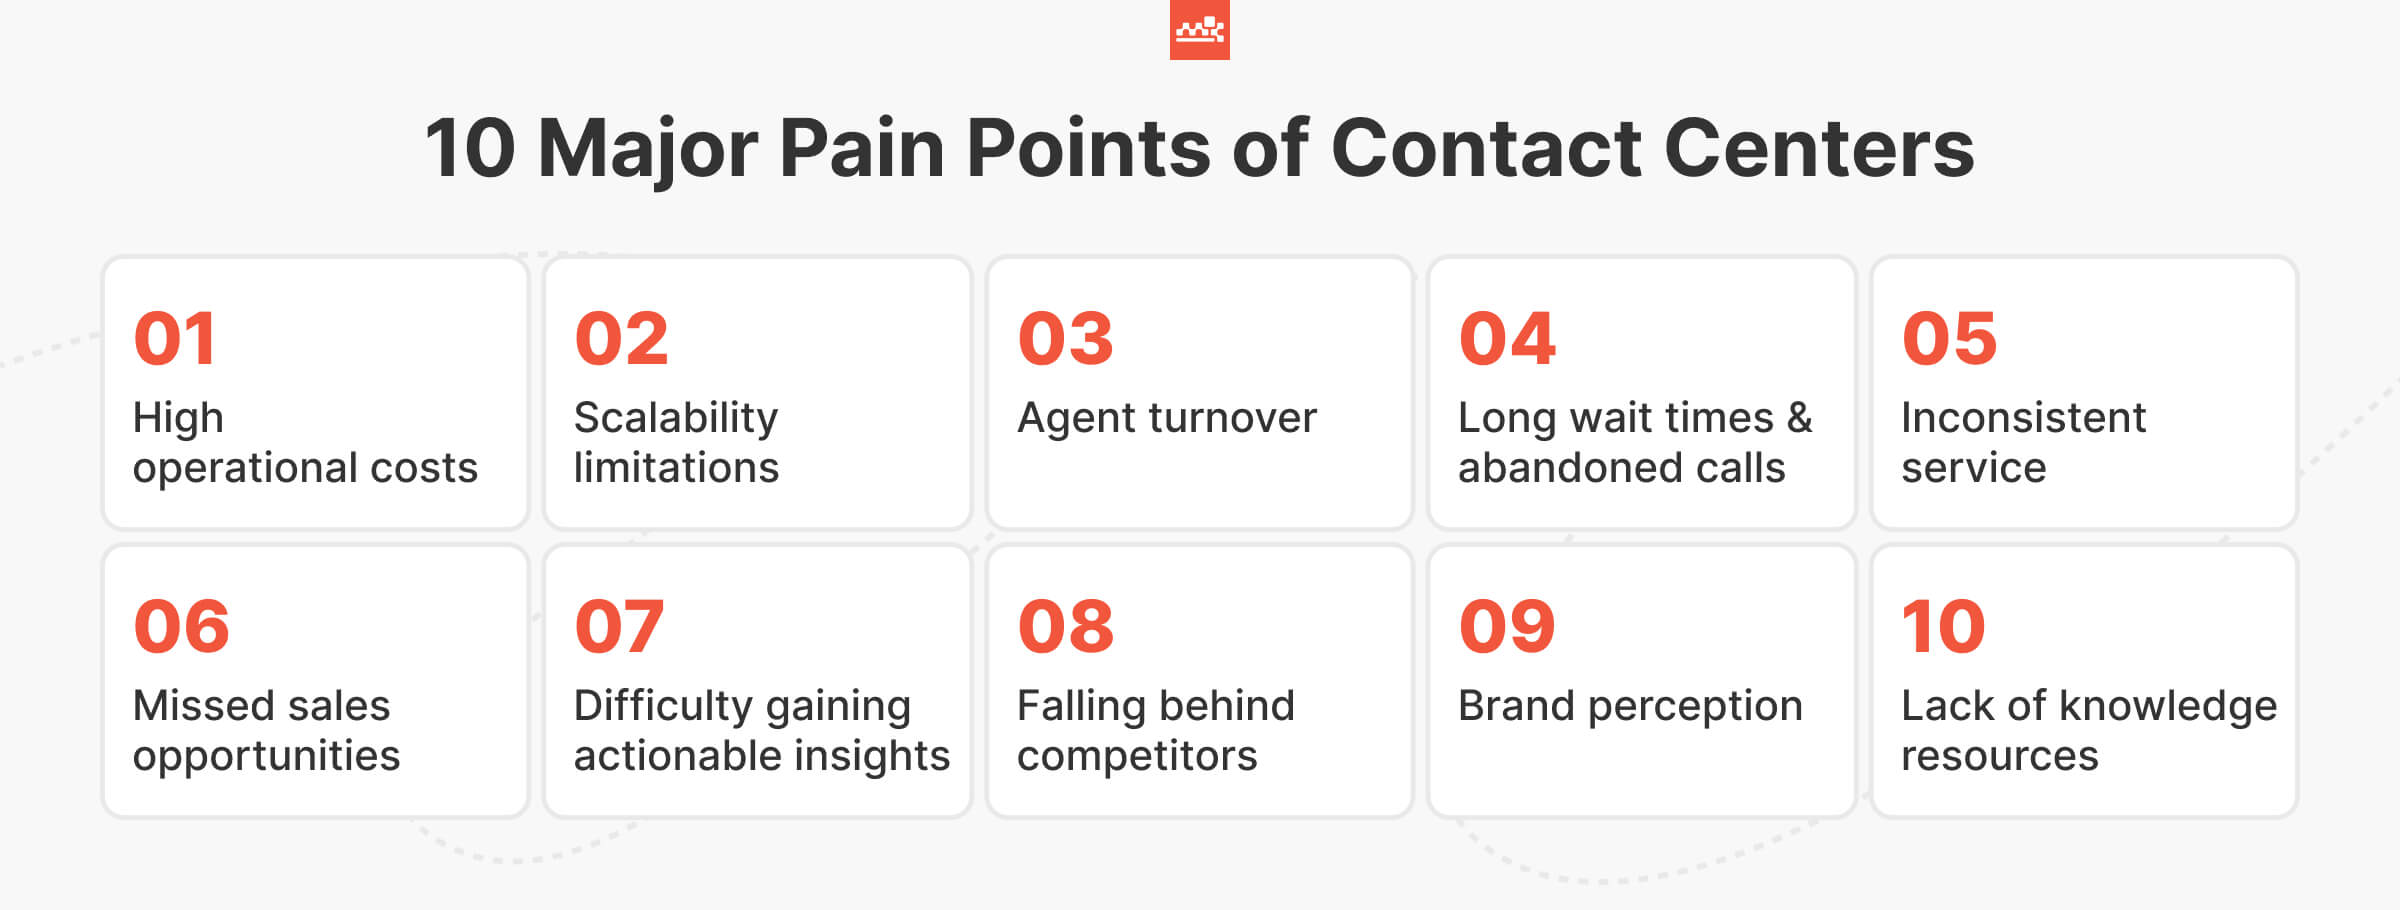 10 Major Pain Points of Contact Centers